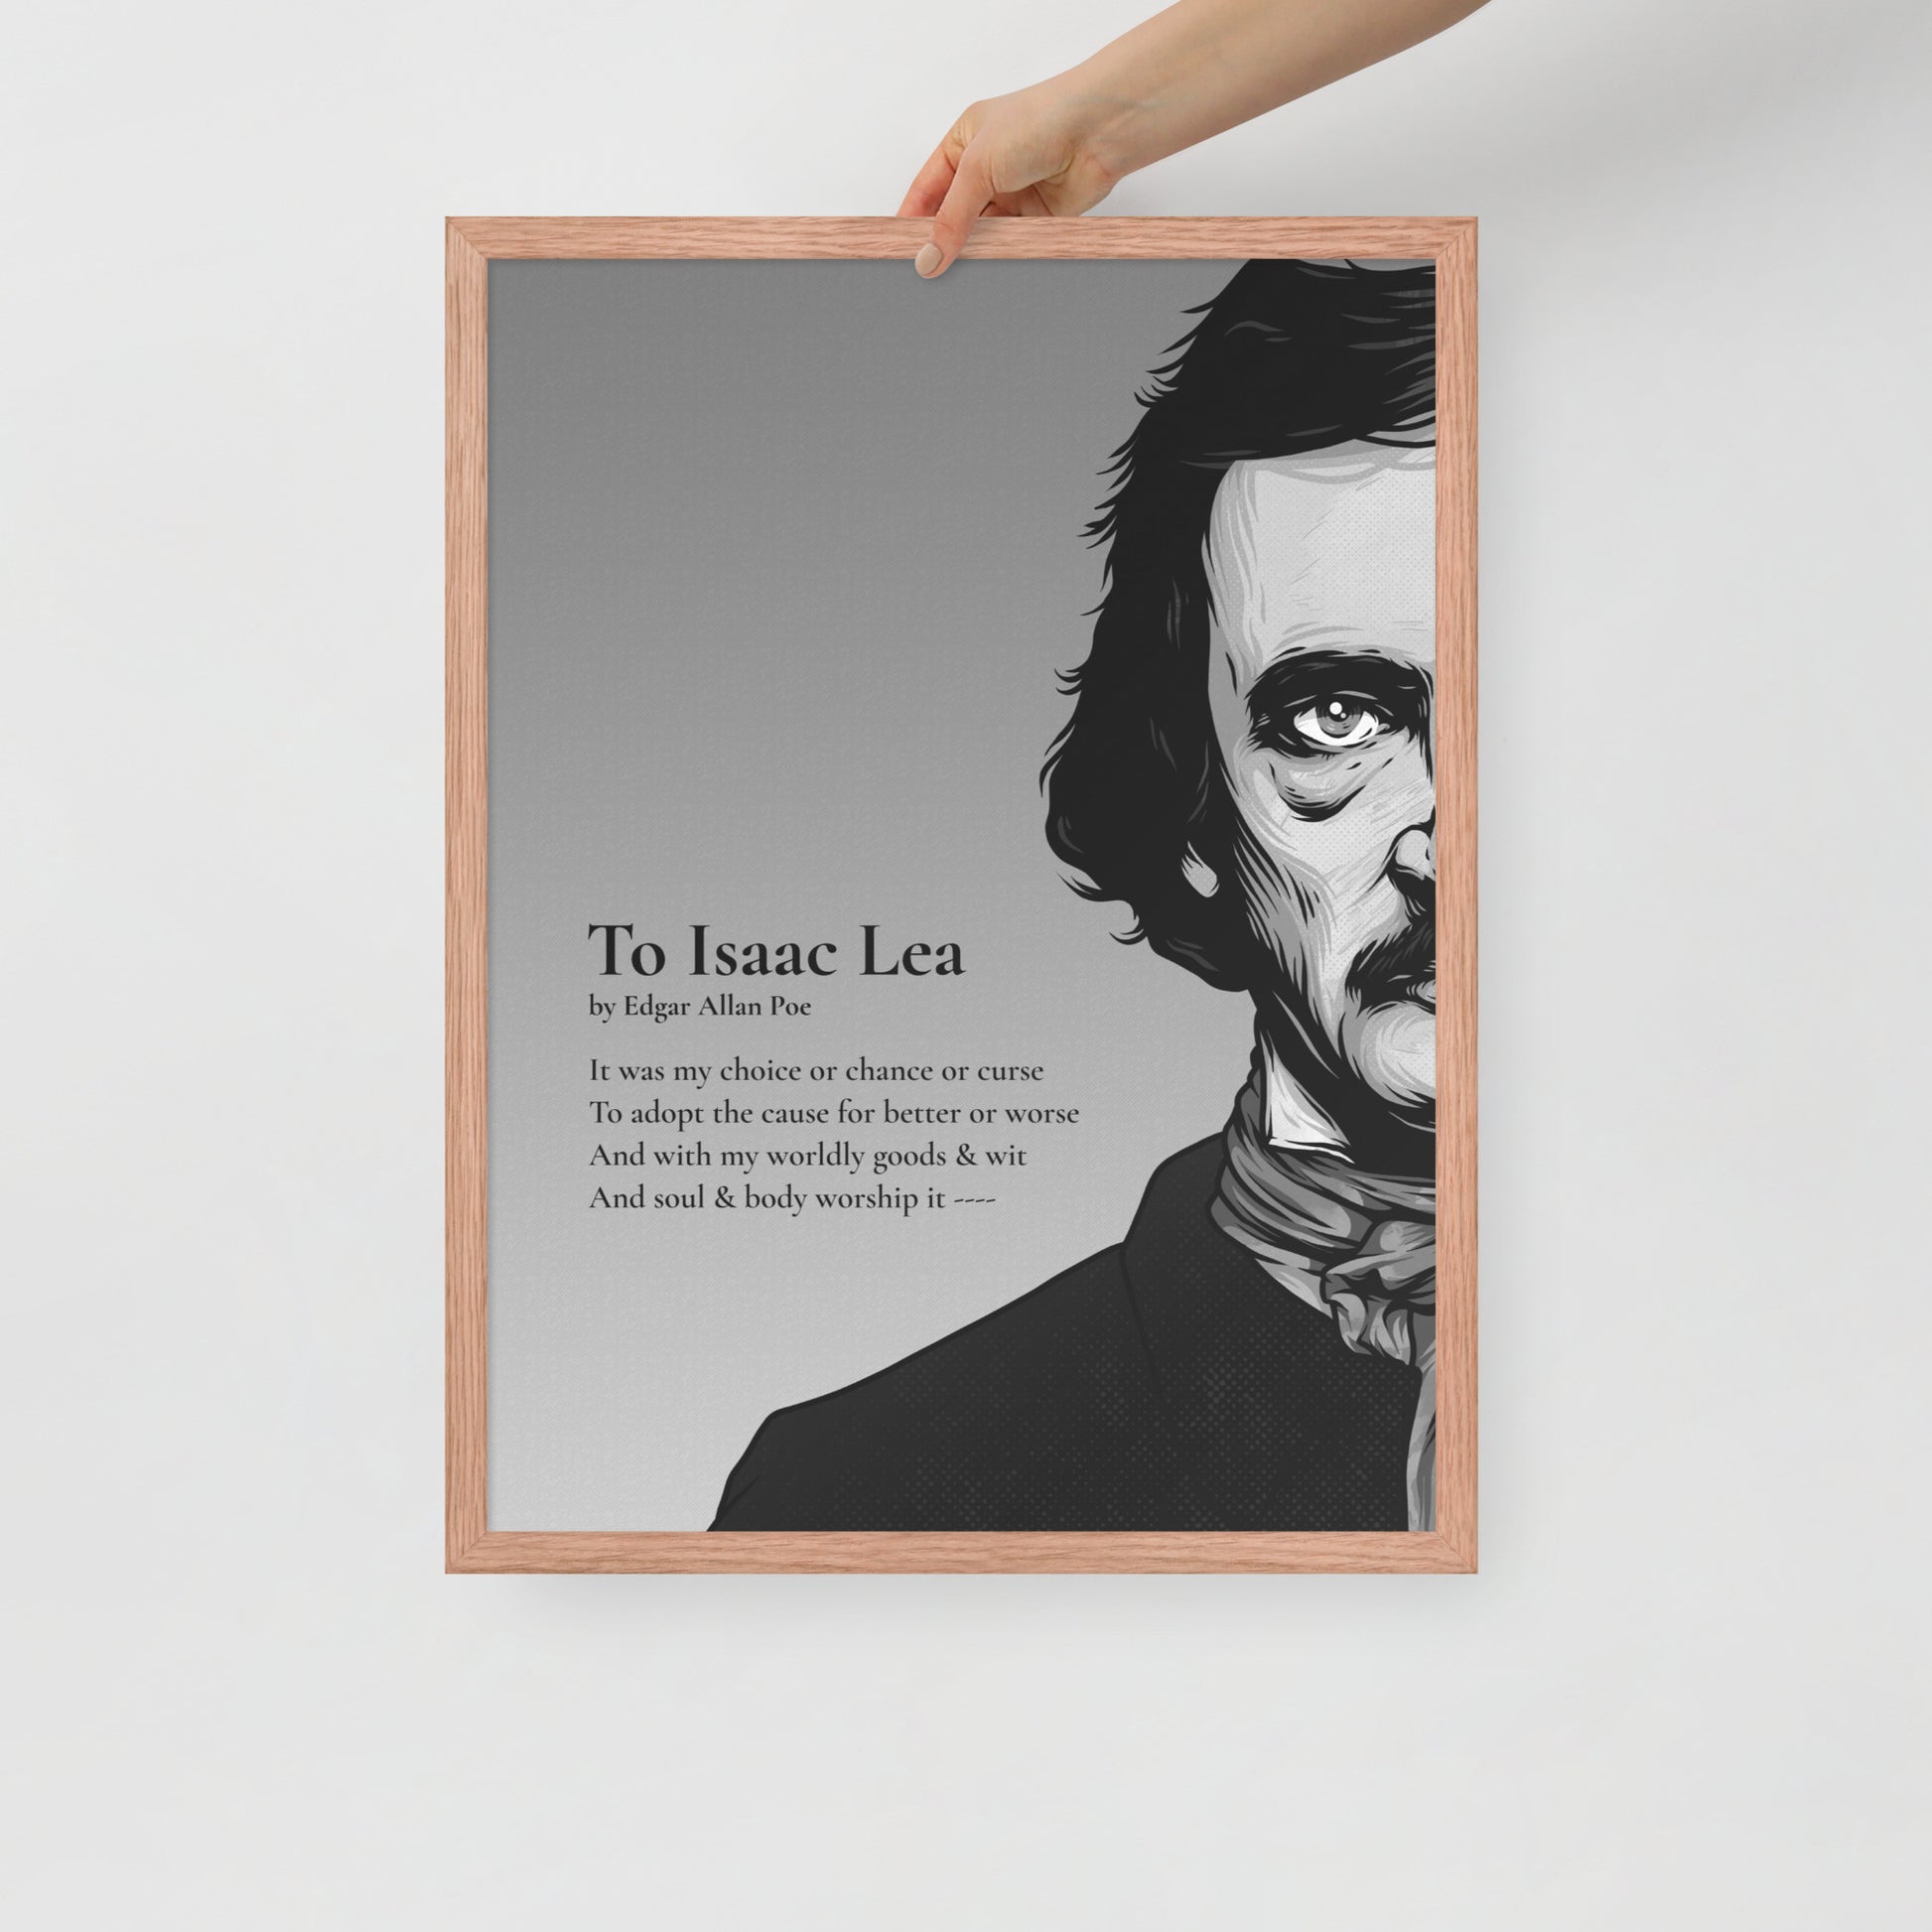 Edgar Allan Poe's 'To Isaac Lea' Framed Matted Poster - 18 x 24 Red Oak Frame